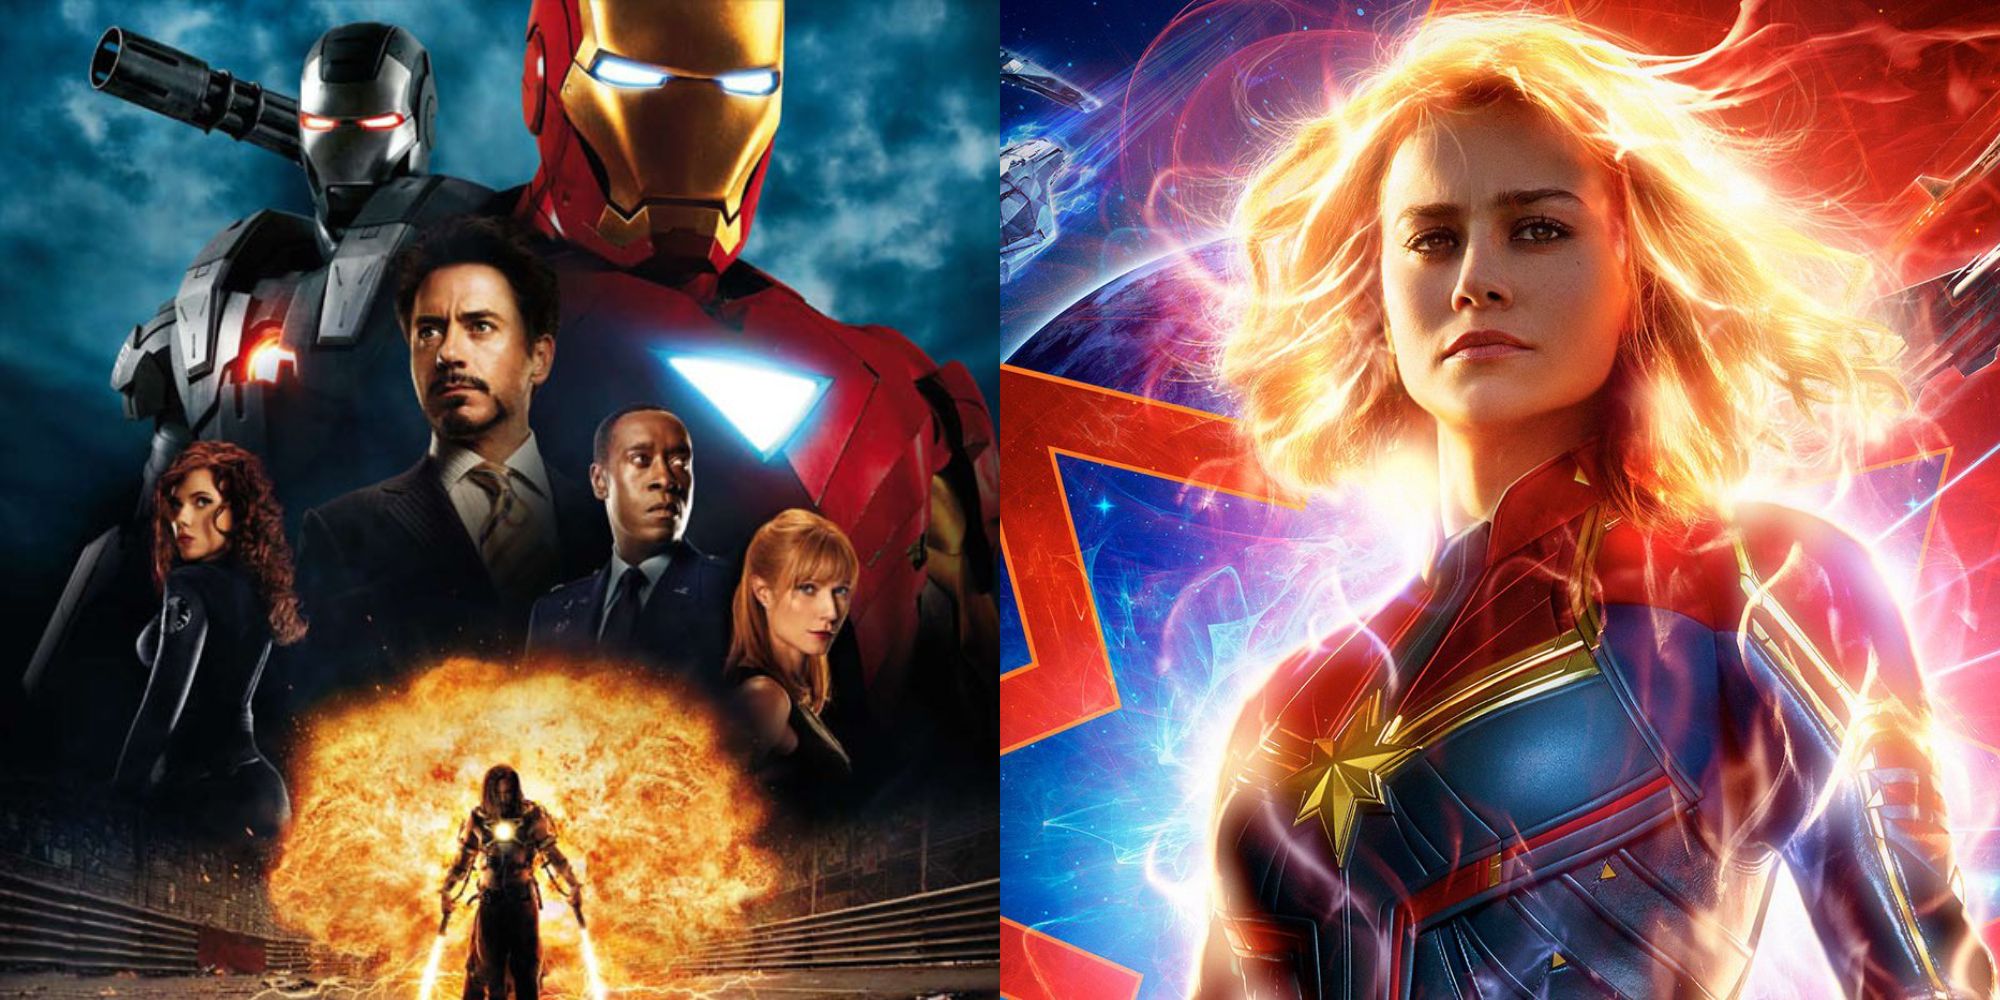 Split image showing posters for Iron Man 2 and Captain Marvel.